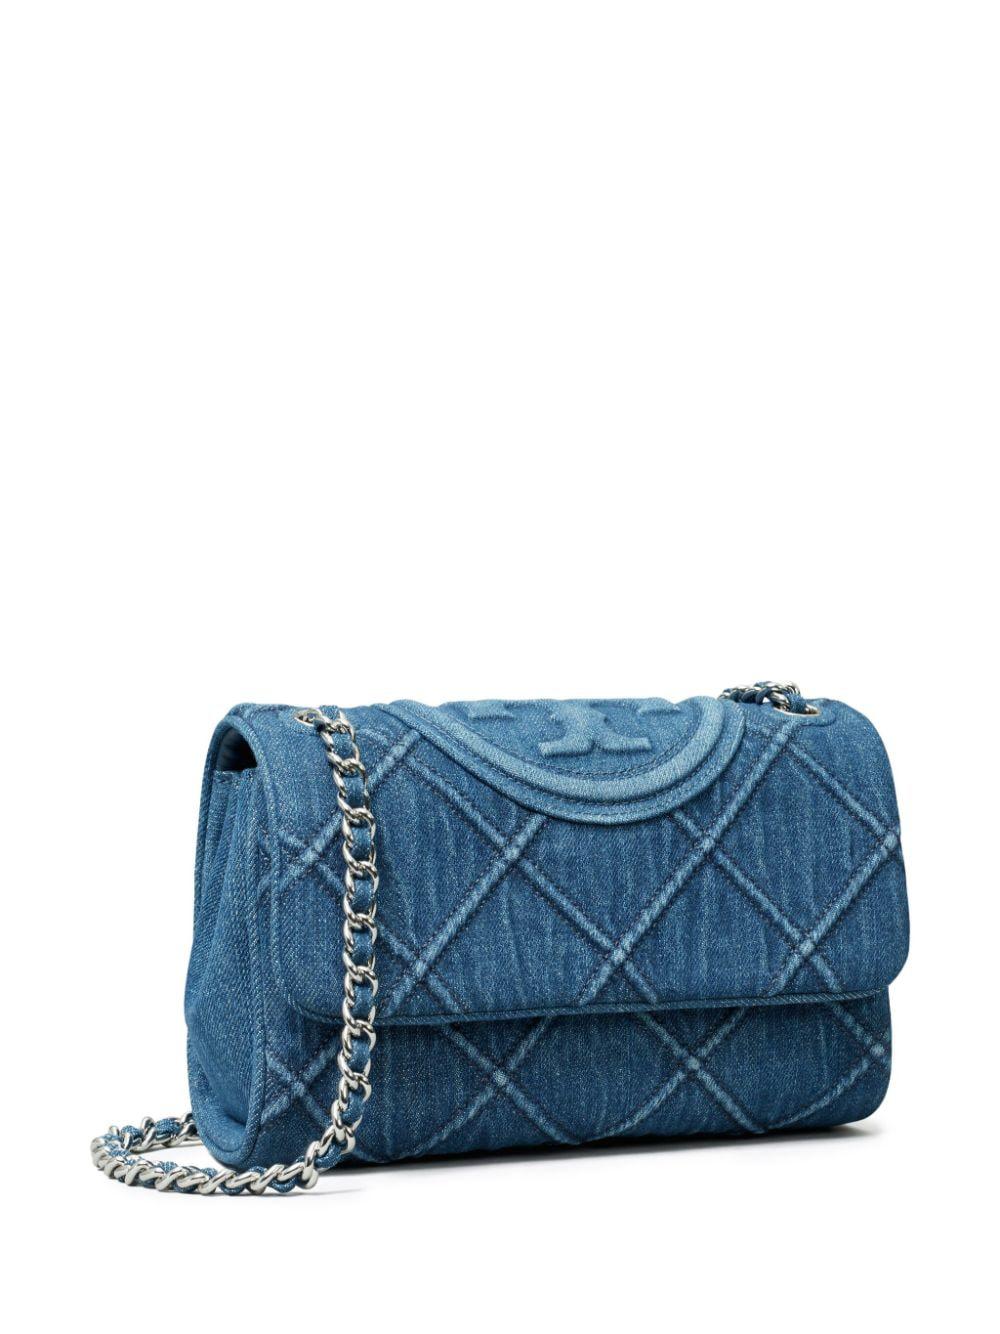 TORY BURCH Quilted Cotton Denim Mini Shoulder Bag with Chain Strap in Light Blue, 22x15x9 cm